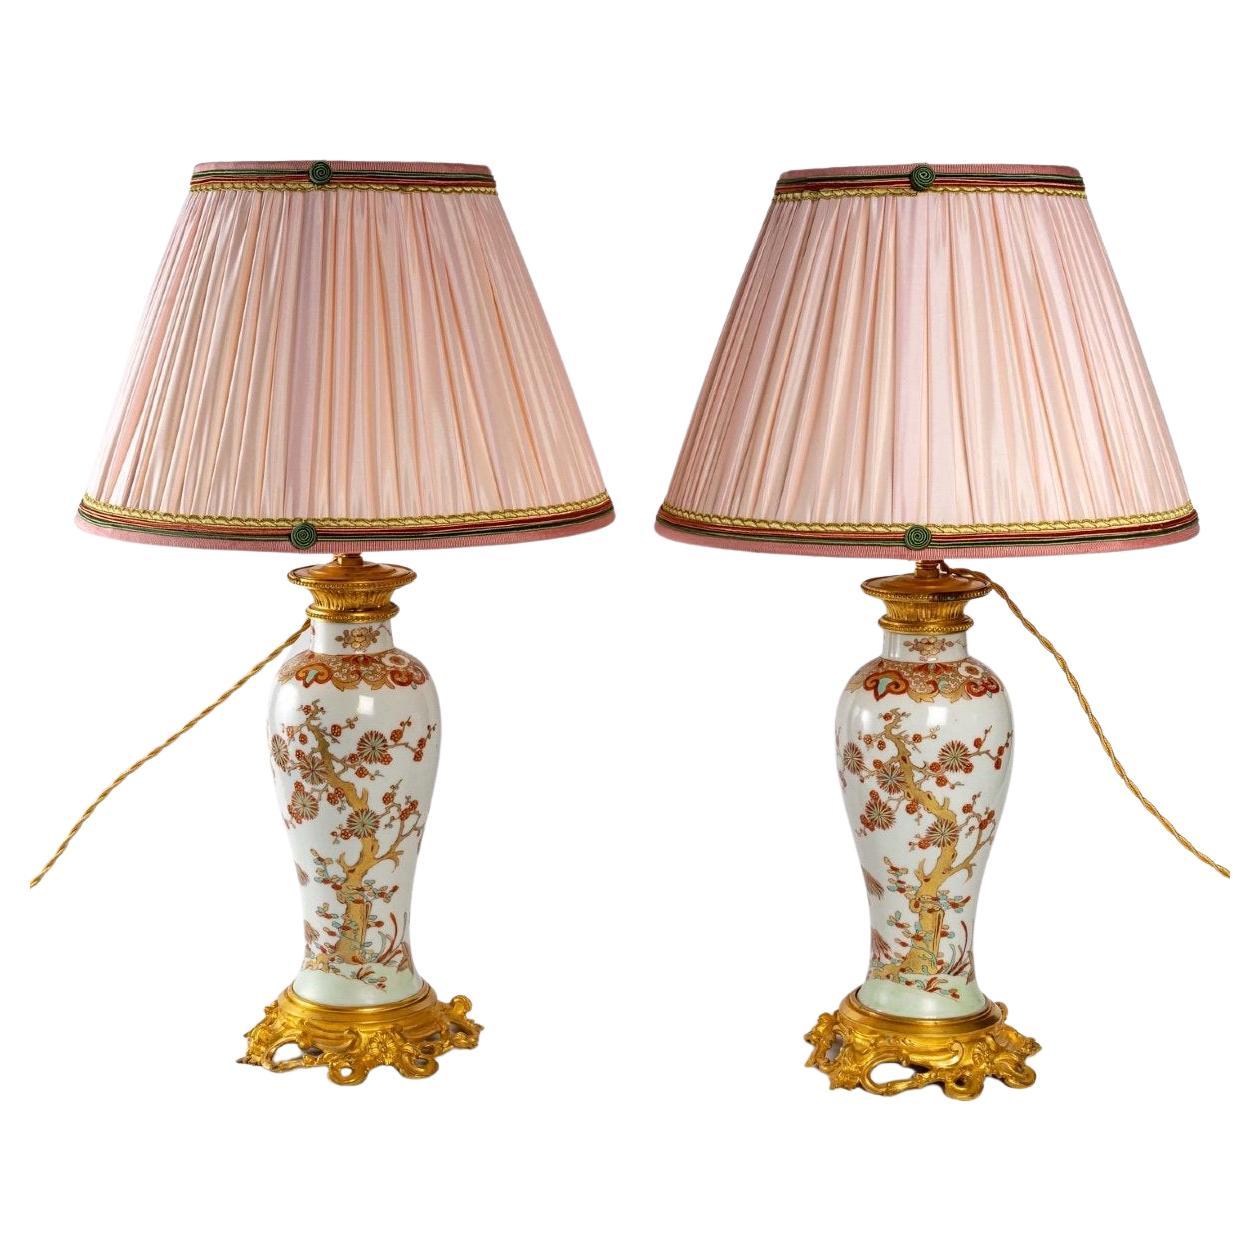 Pair Of Porcelain Vases Mounted Lamps Late 19th Century